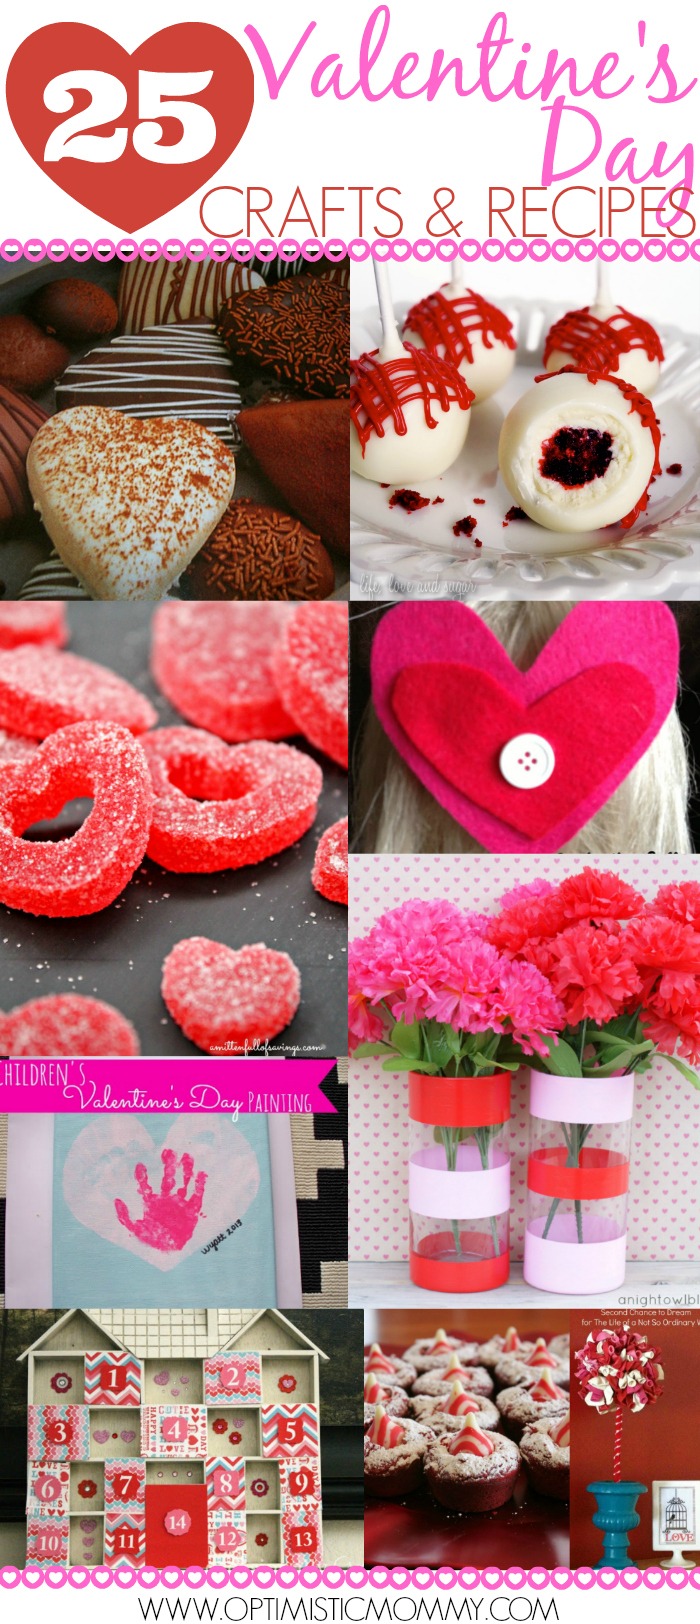 25 Valentine's Day Crafts & Recipes | Optimistic Mommy